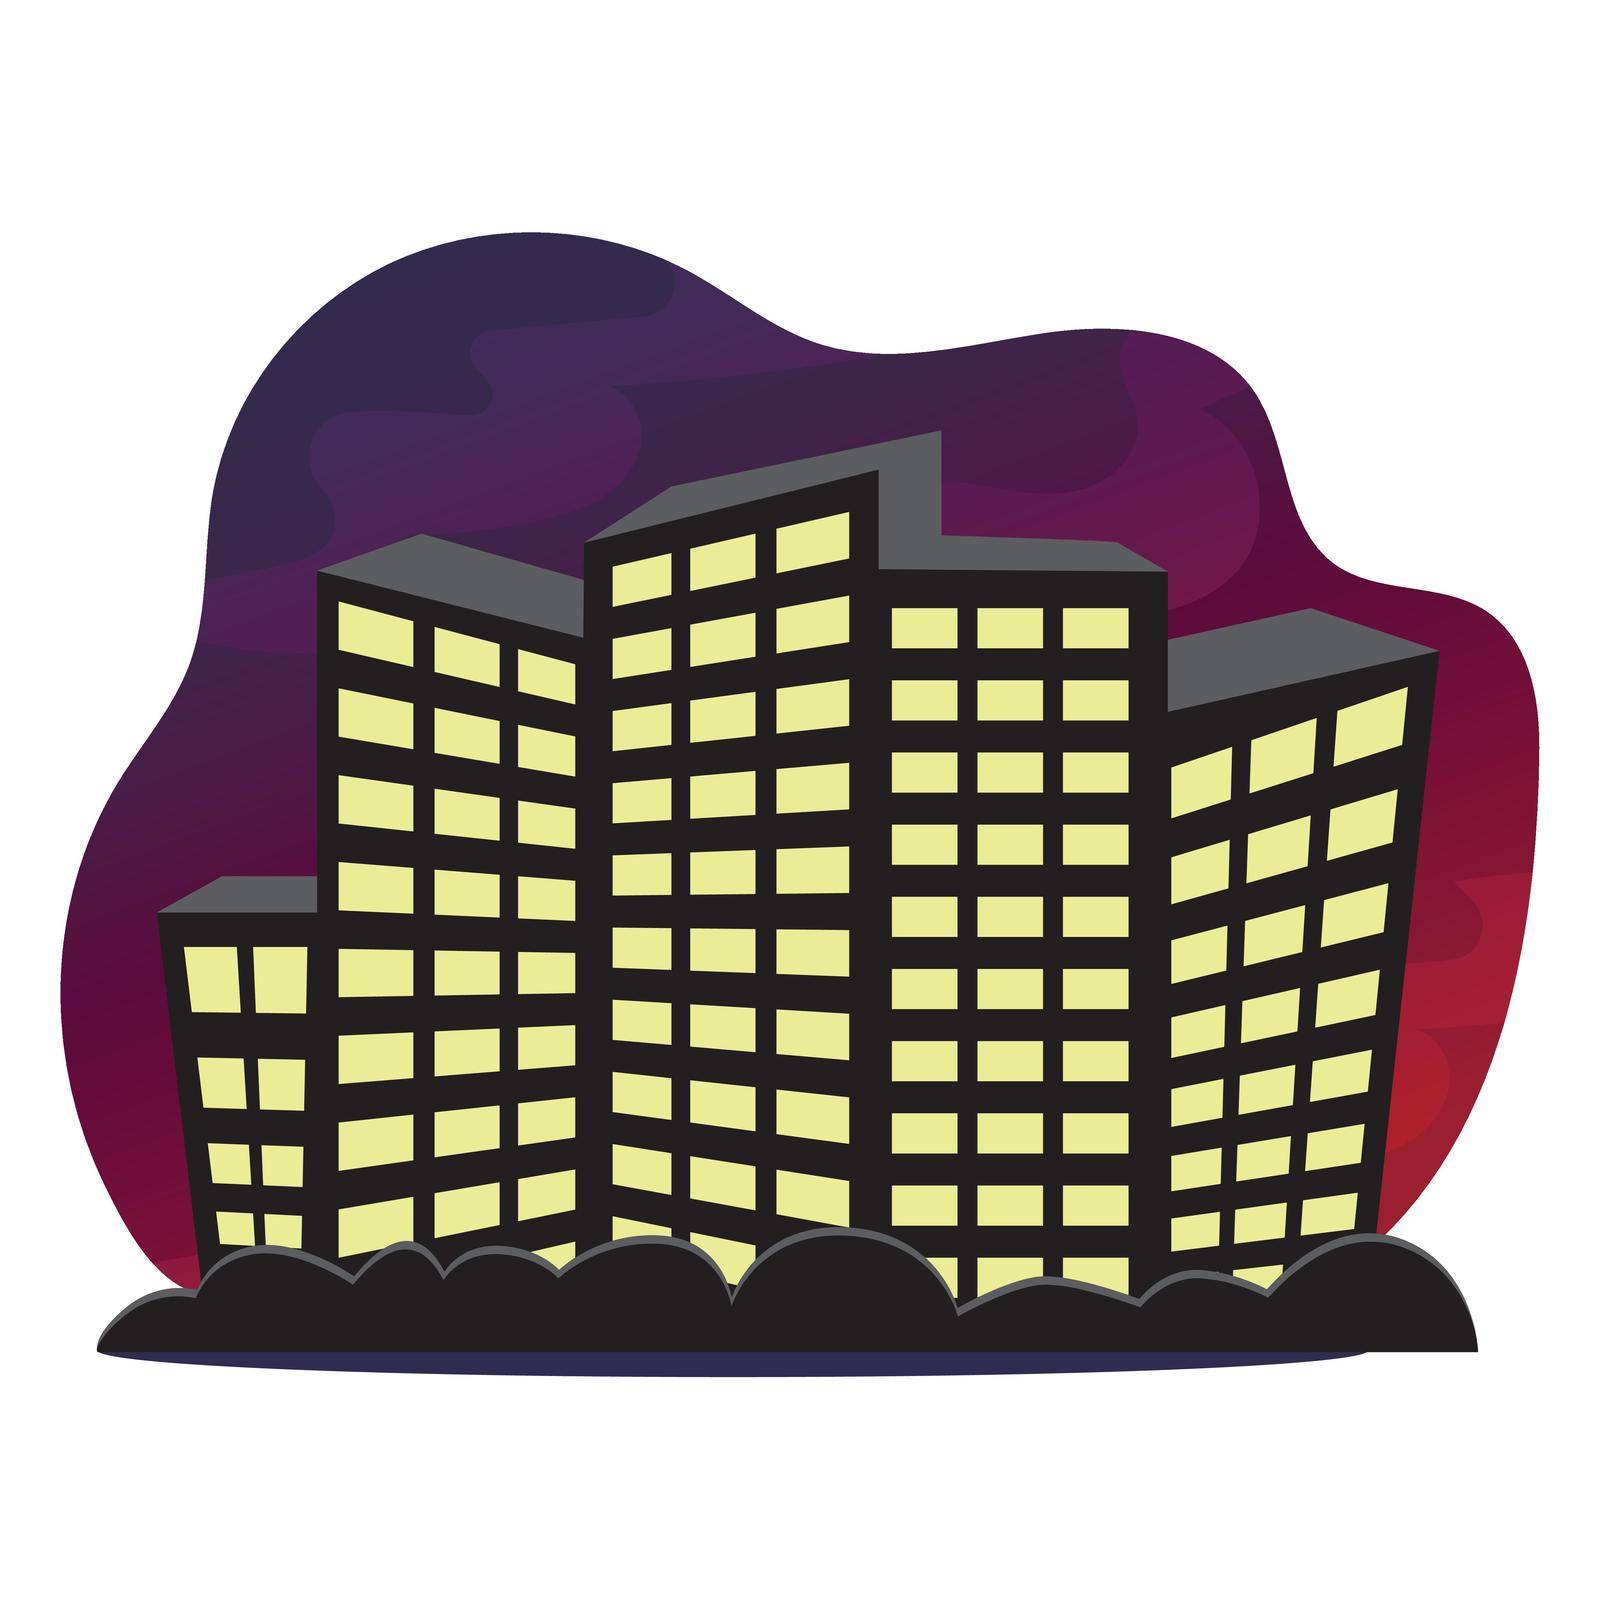 City skyscrapers with bushes on the night sky isolated in a bubble. Simple minimalistic metropolis landscape in flat style.